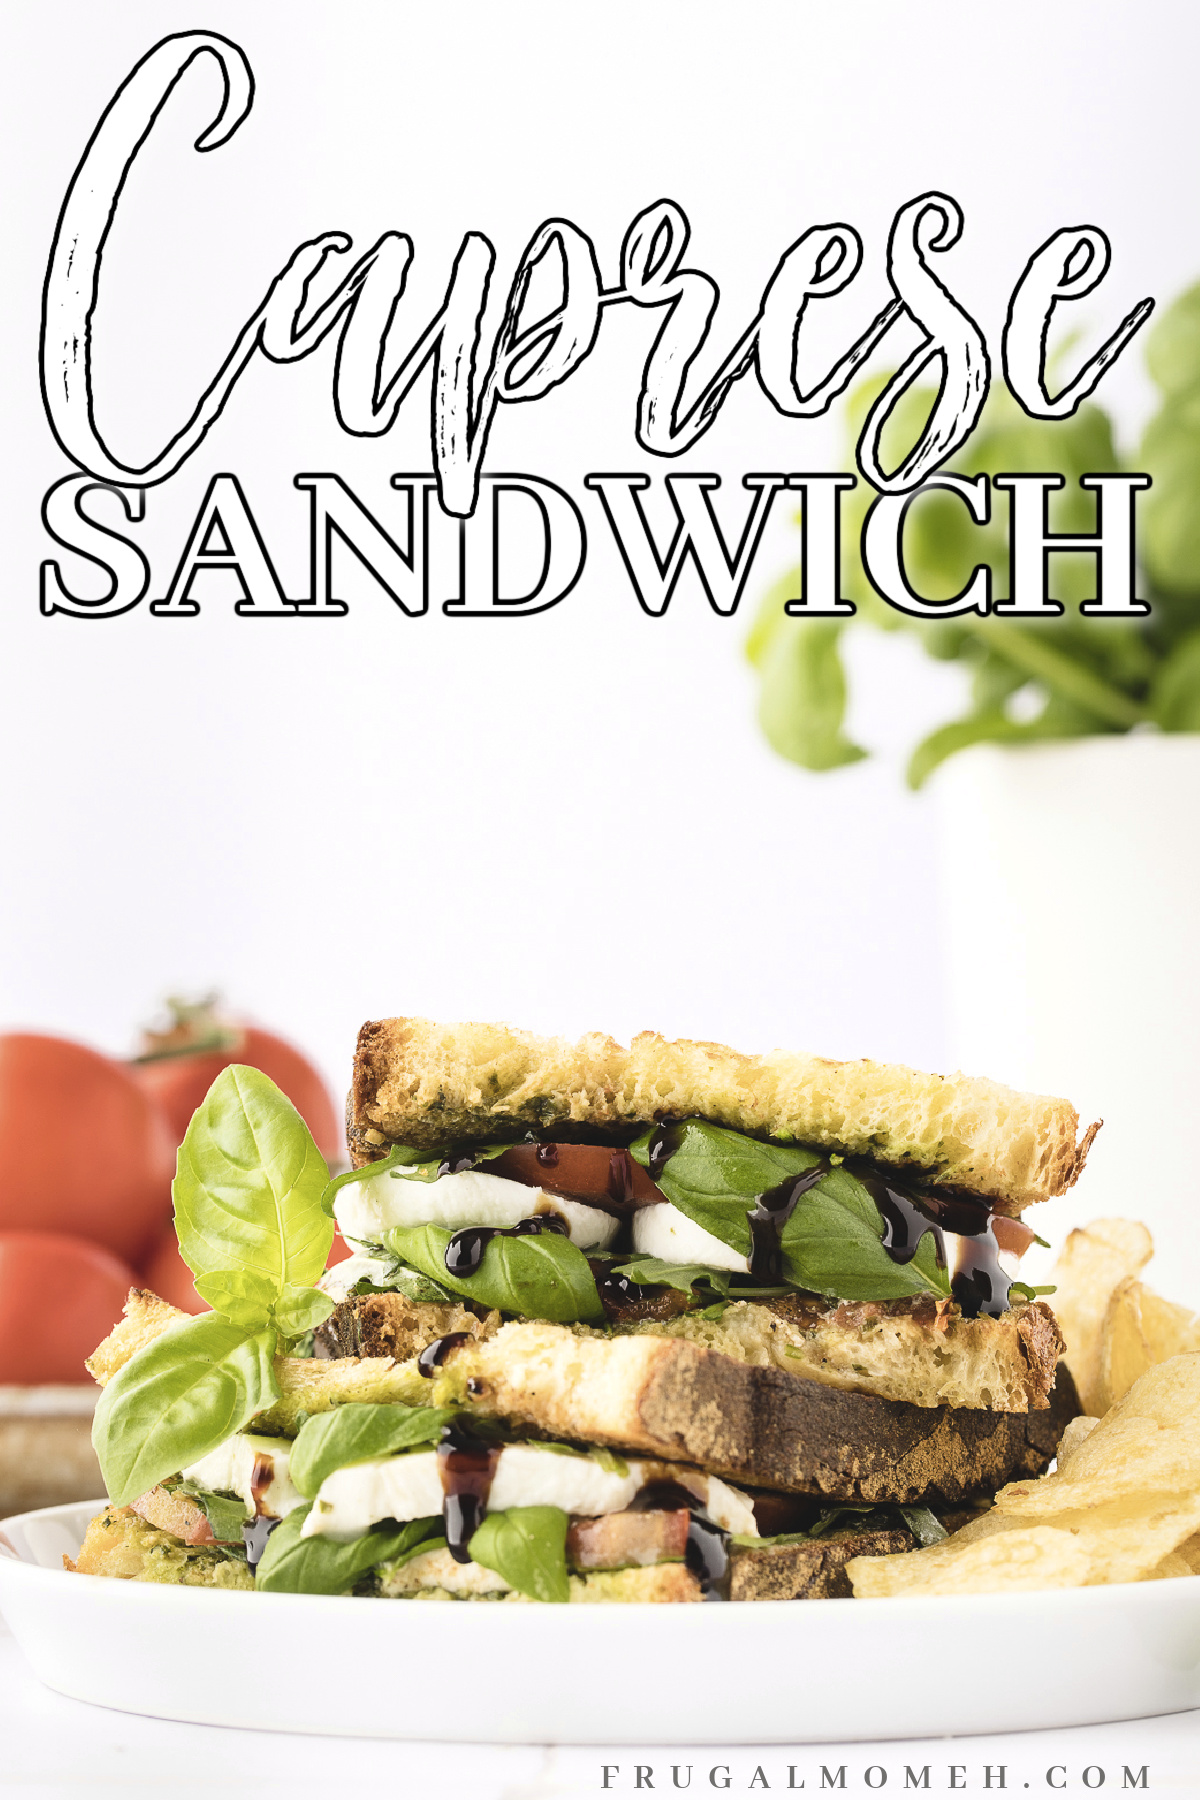 Make a delicious lunch in no time with this quick and easy caprese sandwich recipe featuring Pesto, fresh mozzarella, tomato, and basil.